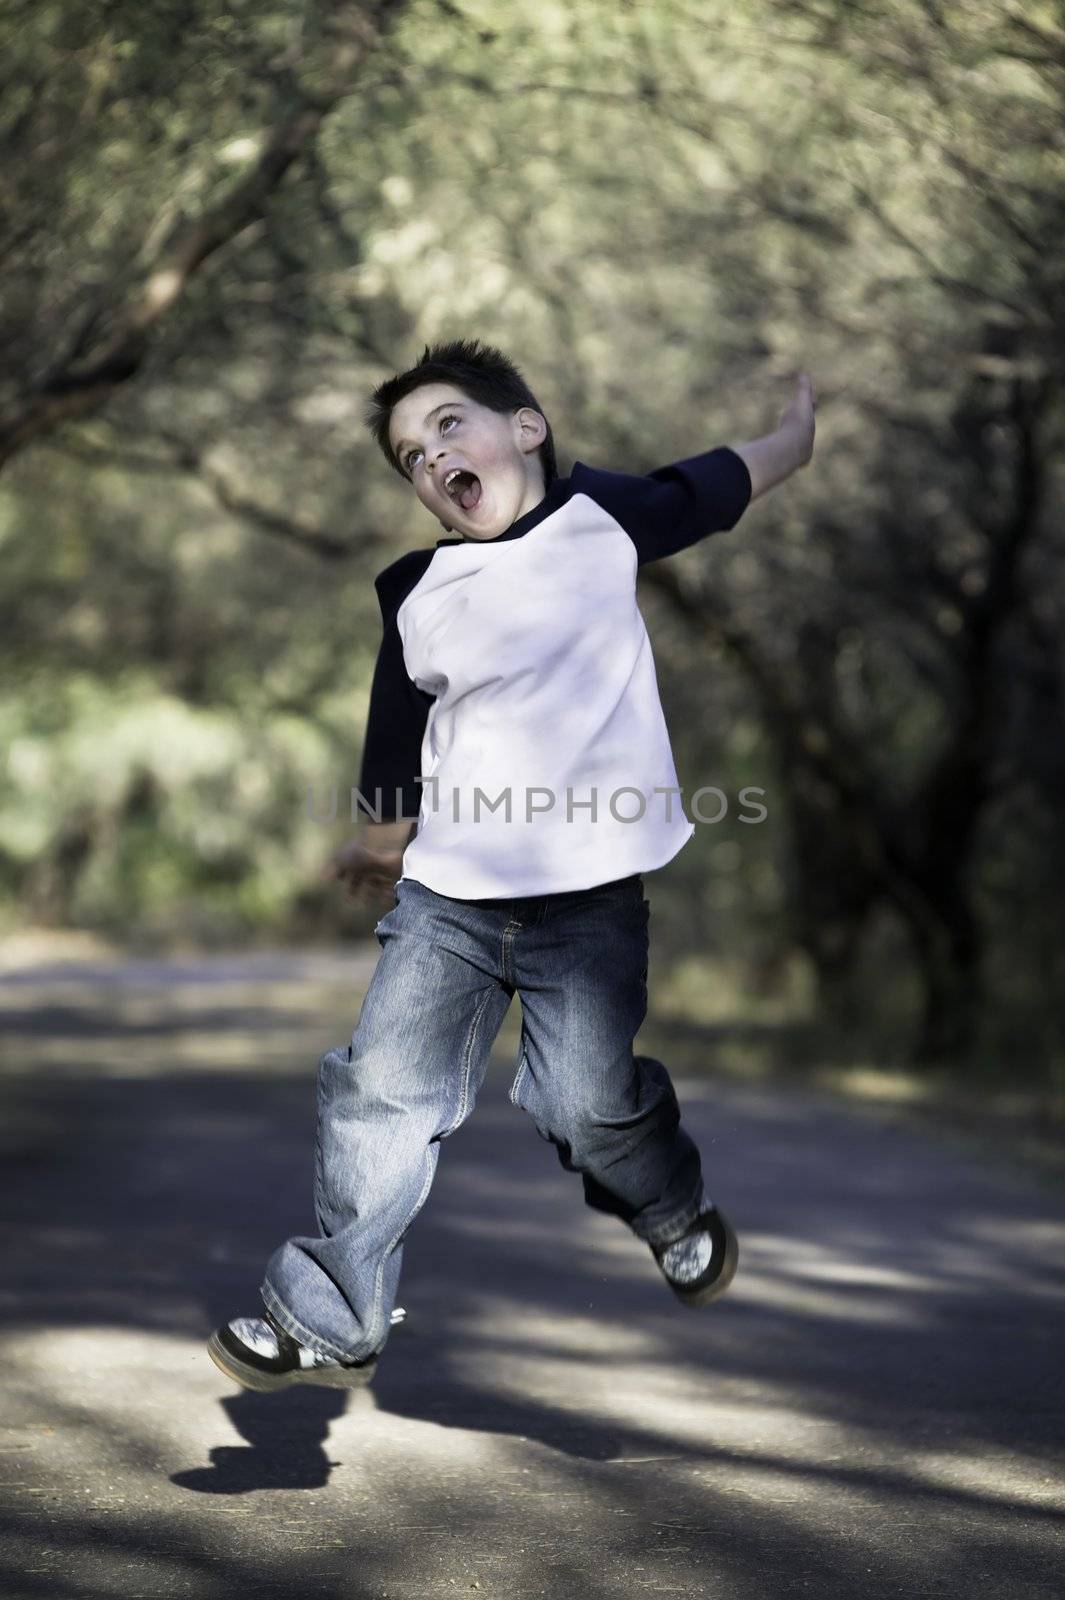 Boy in the Air by Creatista